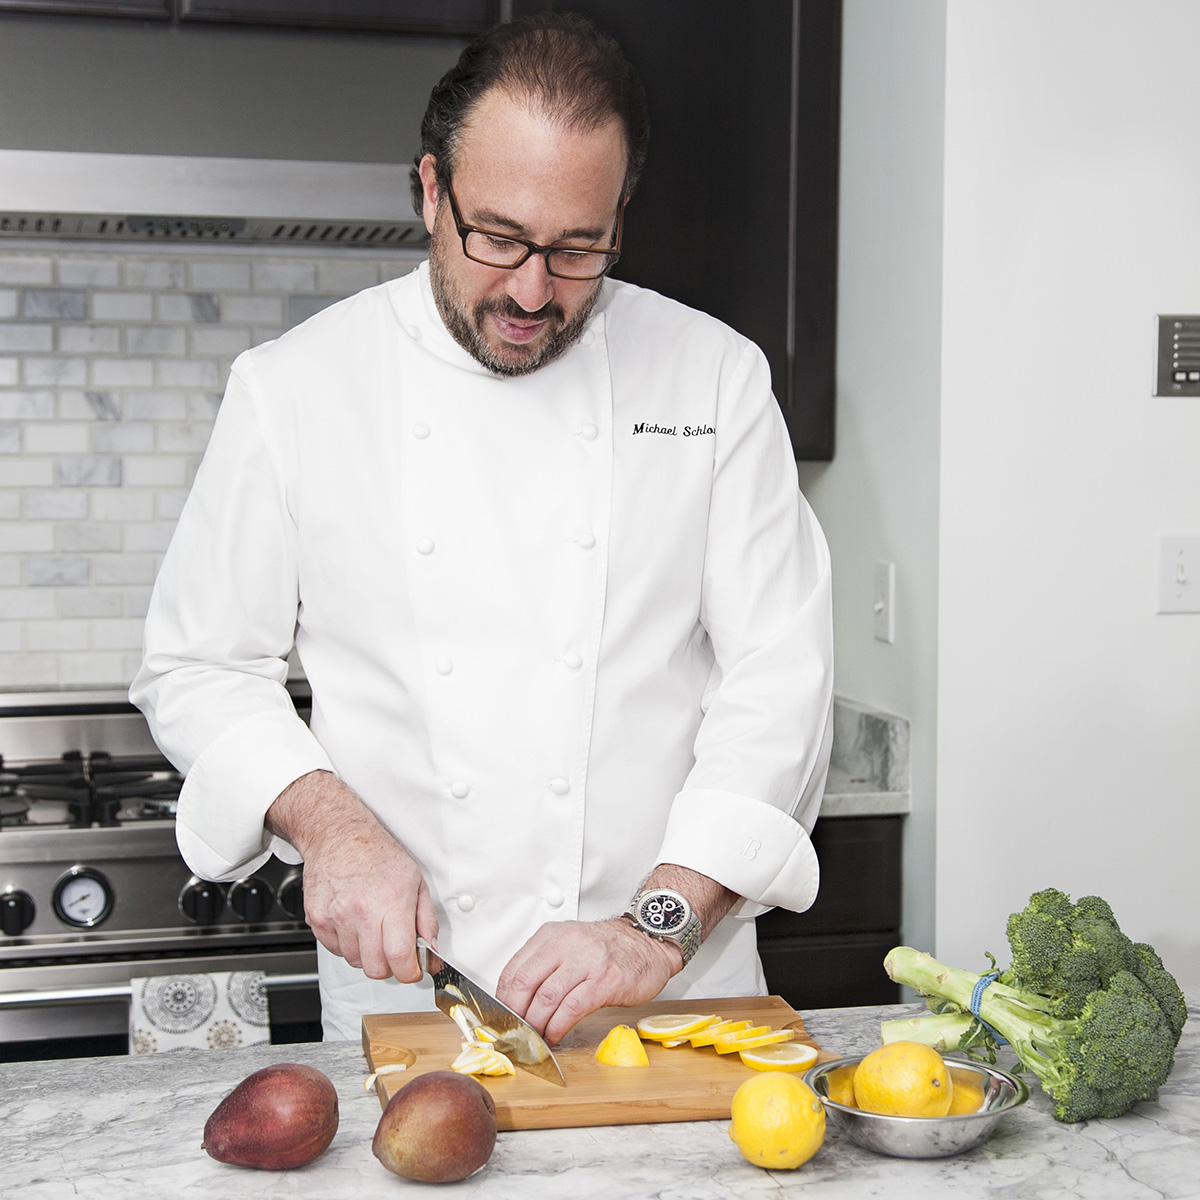 Chef Michael Schlow. / Photo provided